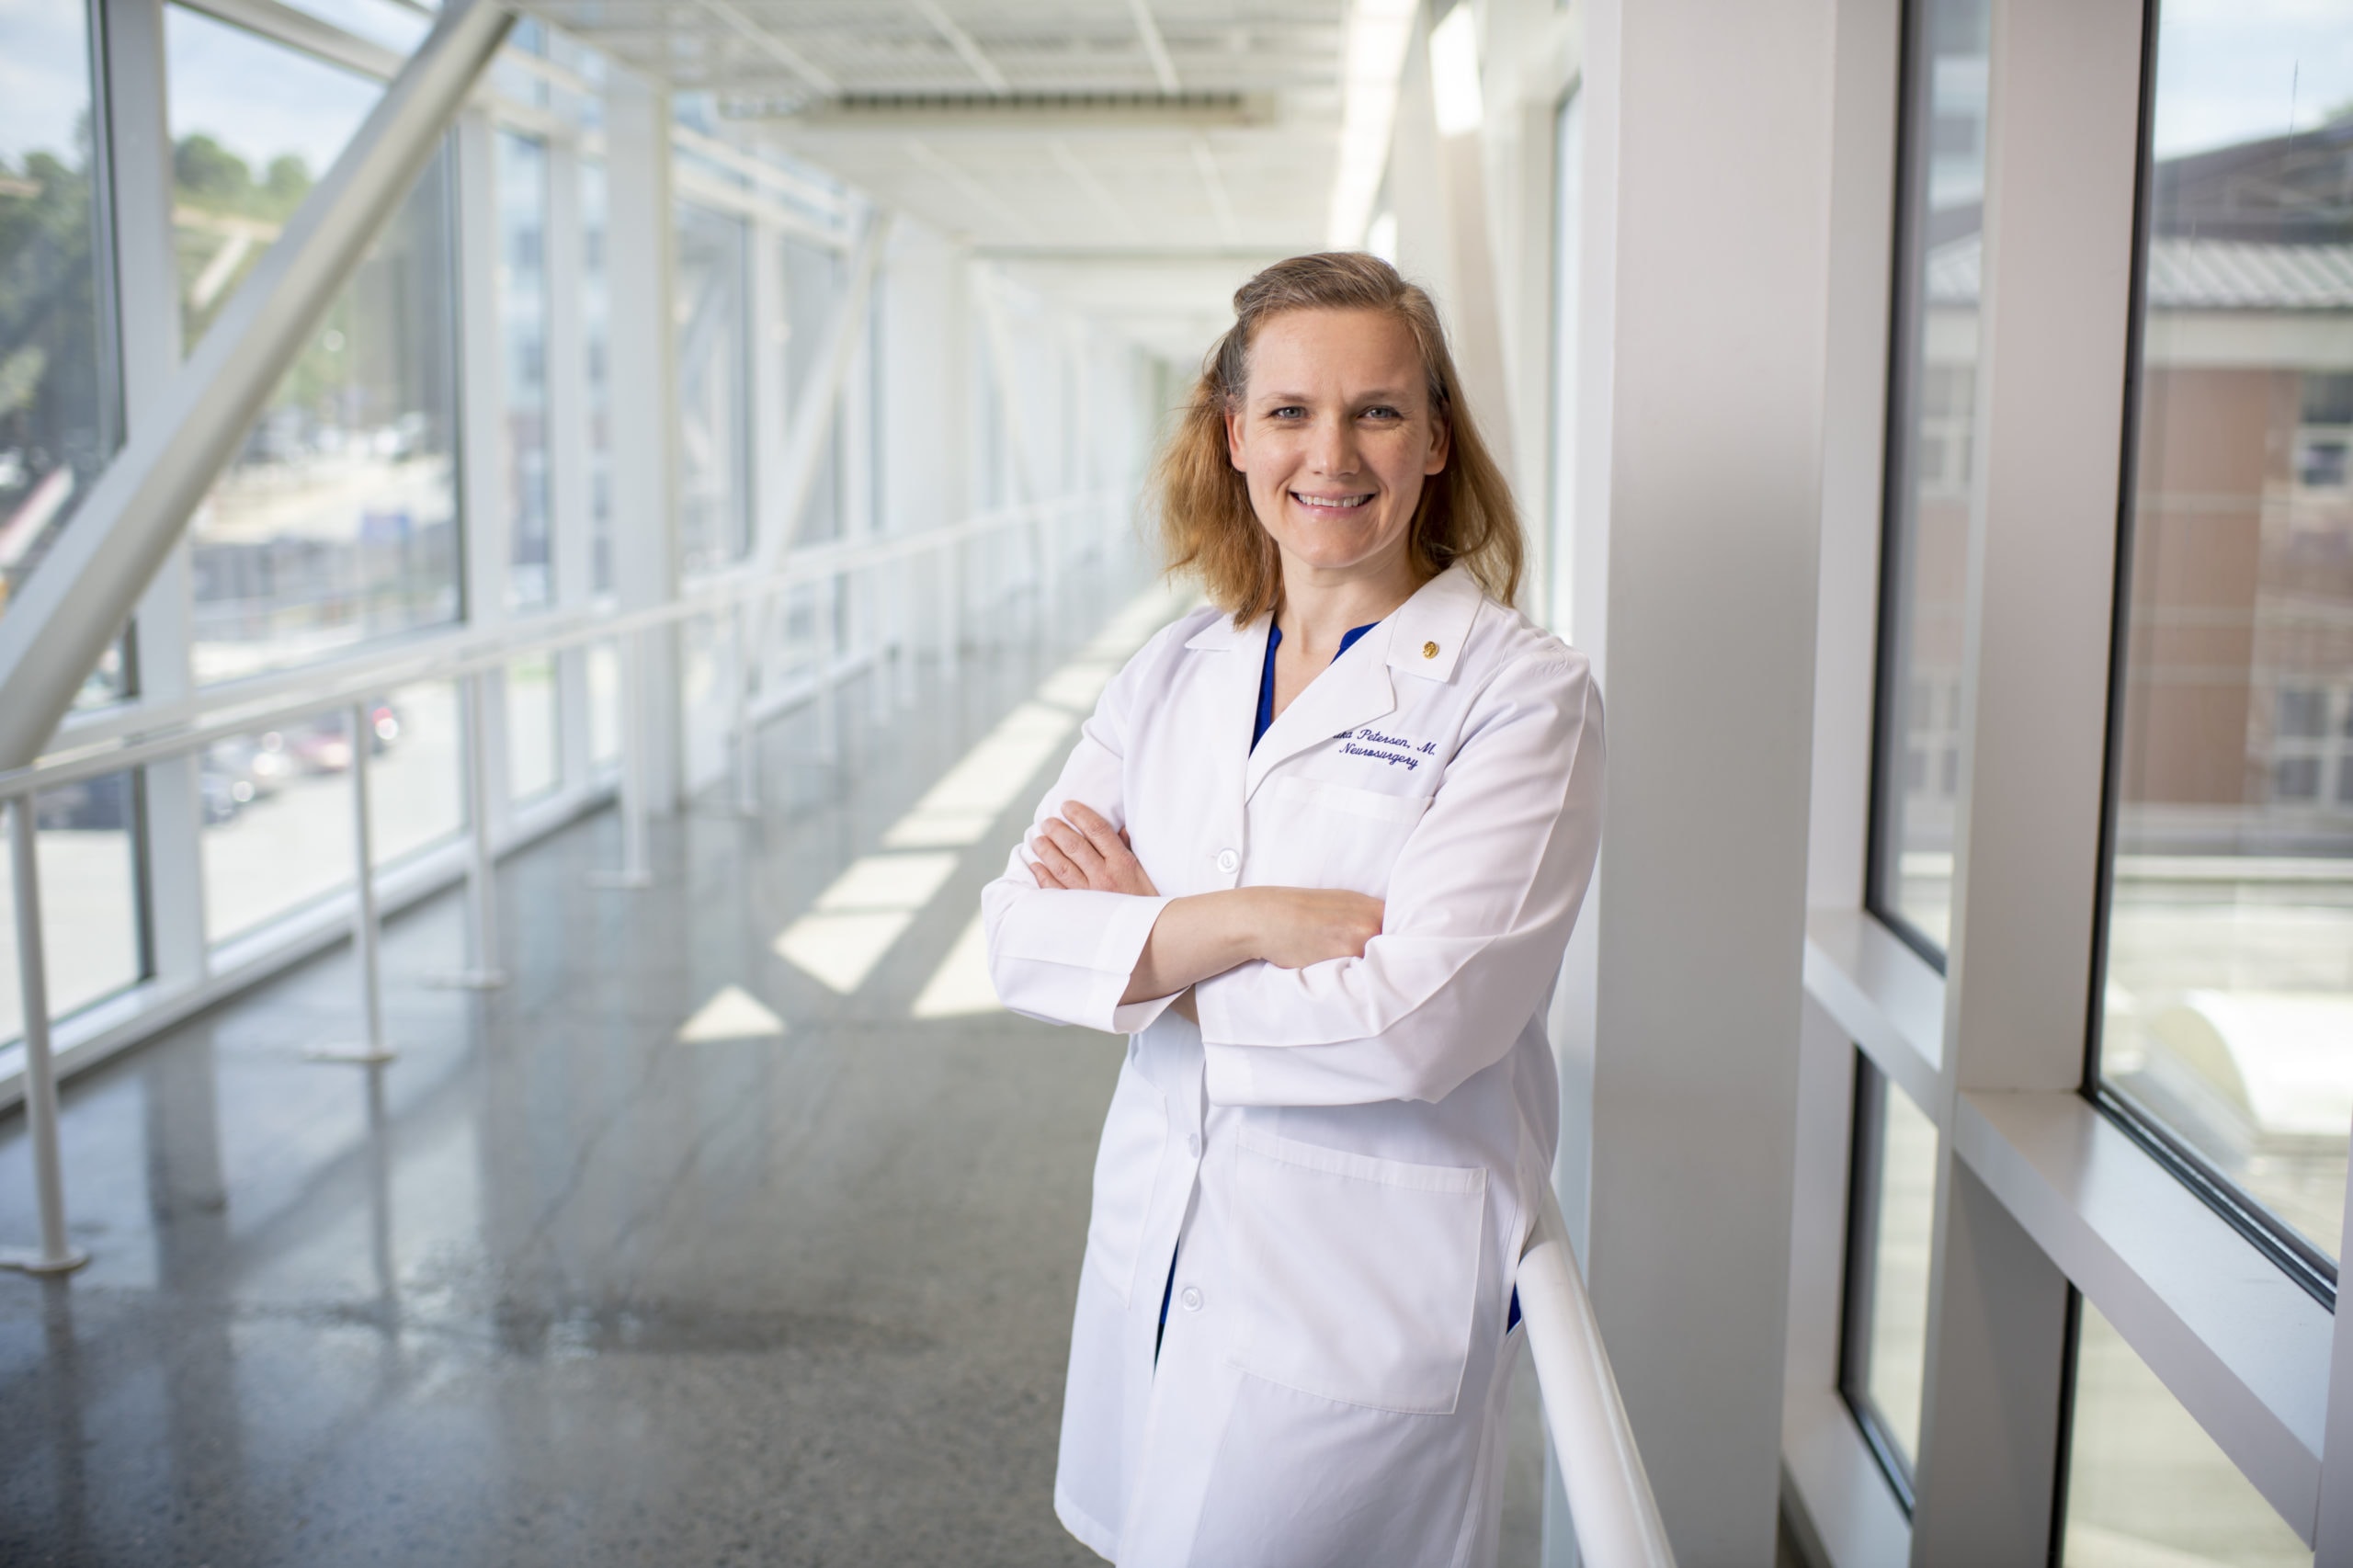 Erika Petersen, M.D., sees study results published in JAMA